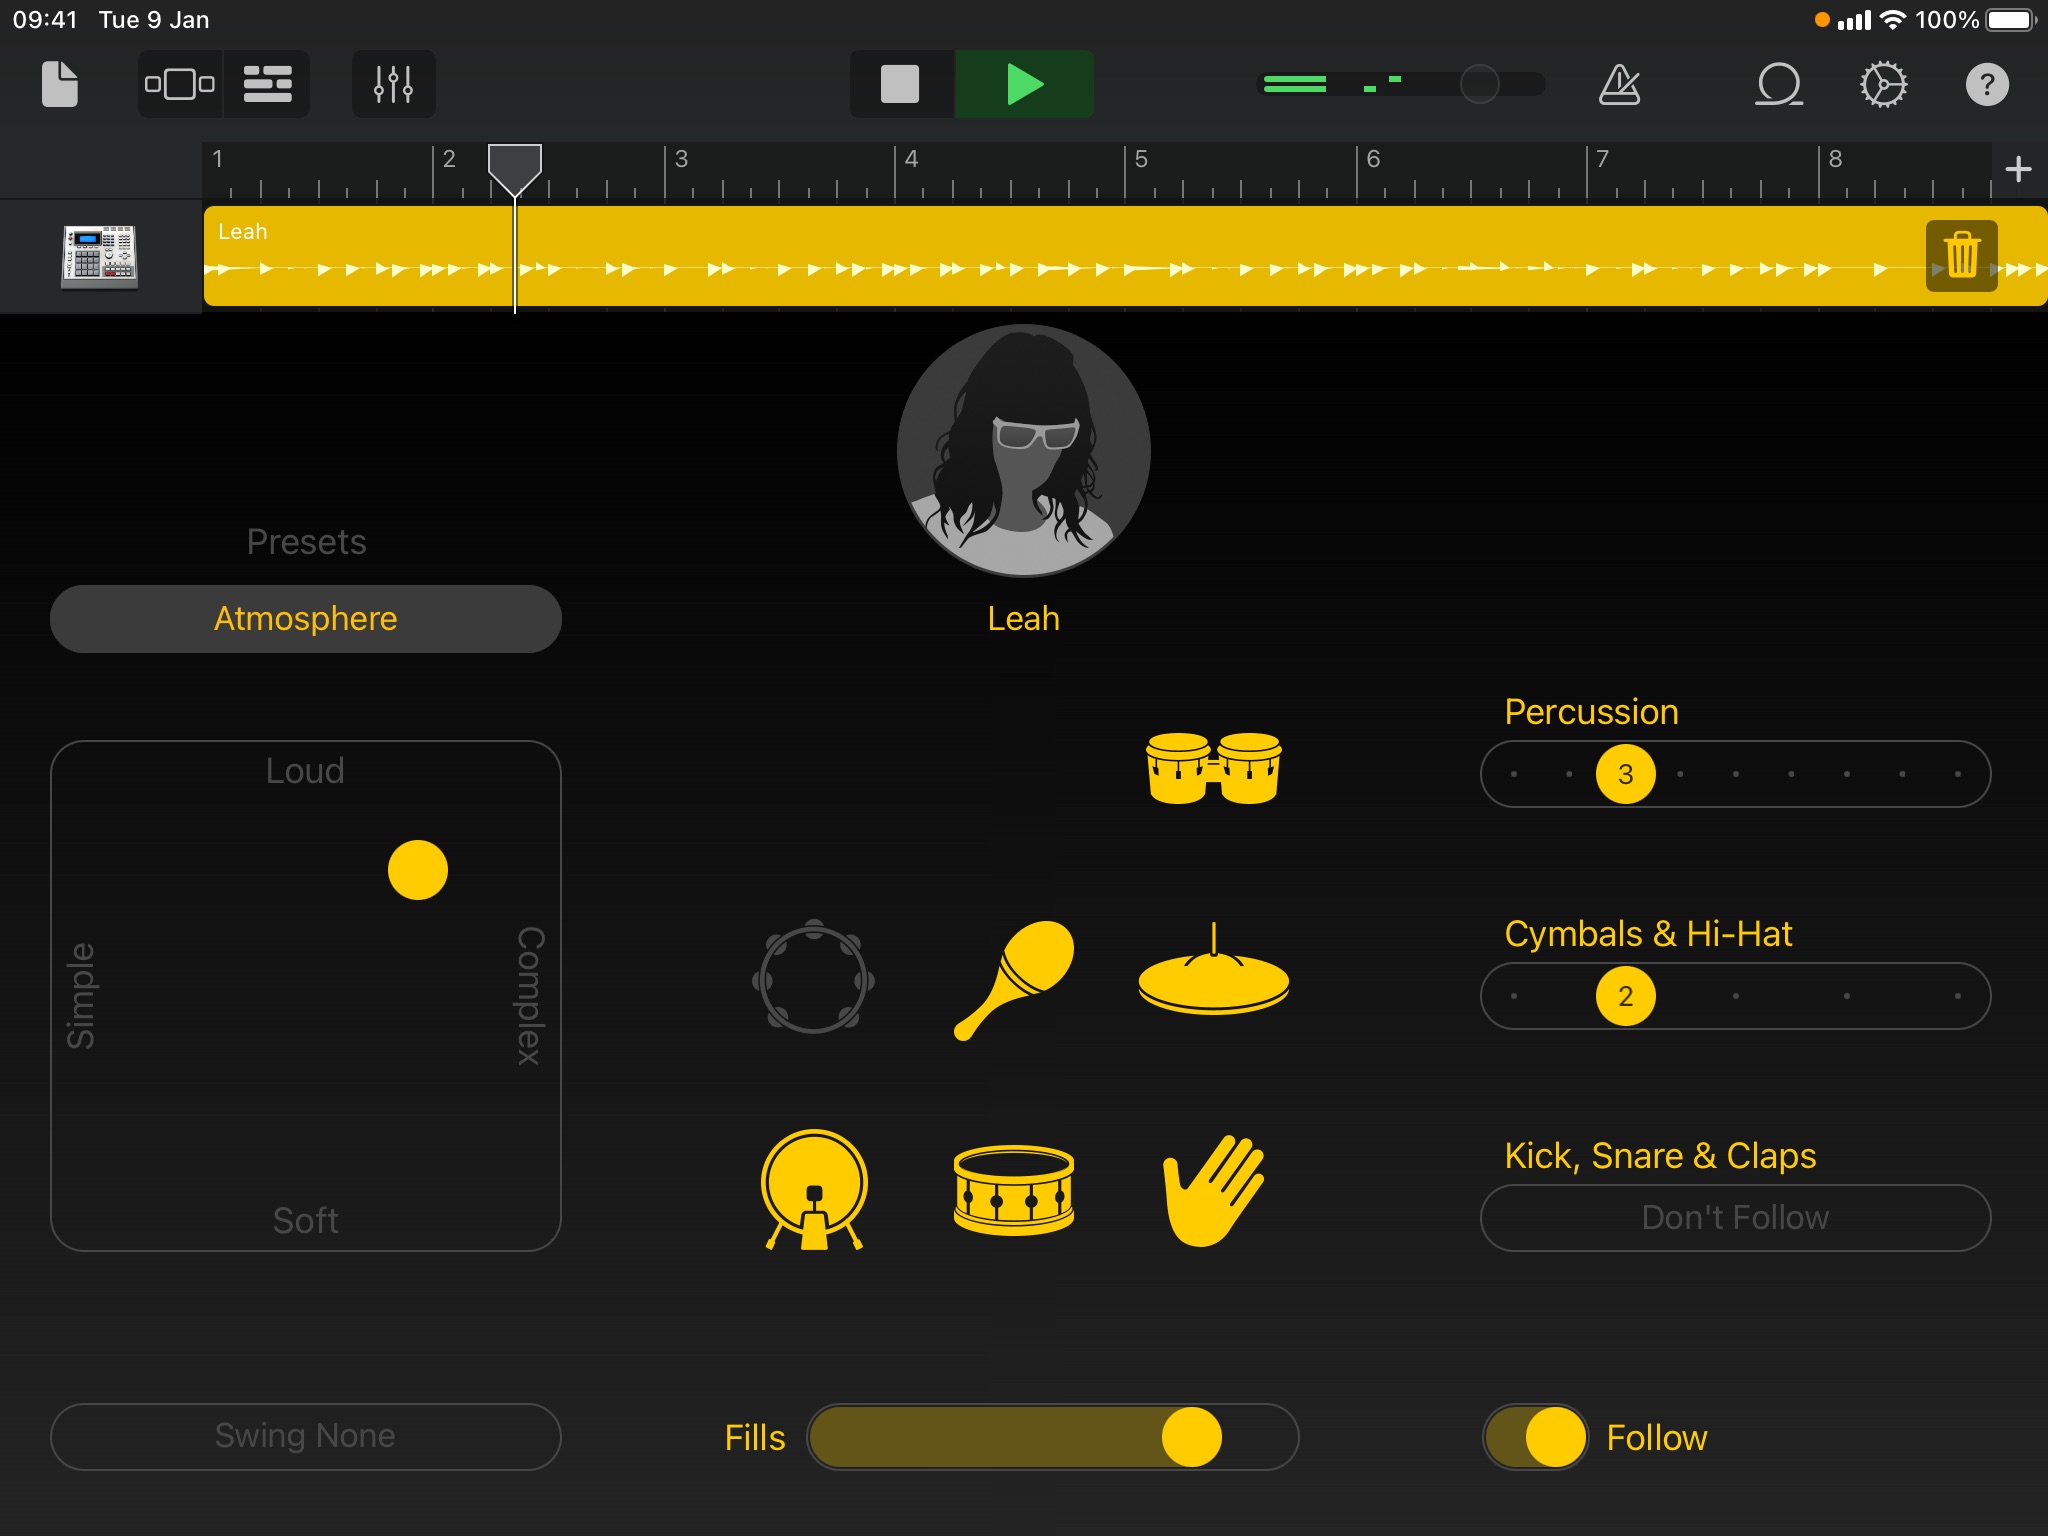 Screenshot showing the Drummer interface in GarageBand. The track is playing back, and the Drummer ‘Leah’ has been selected.